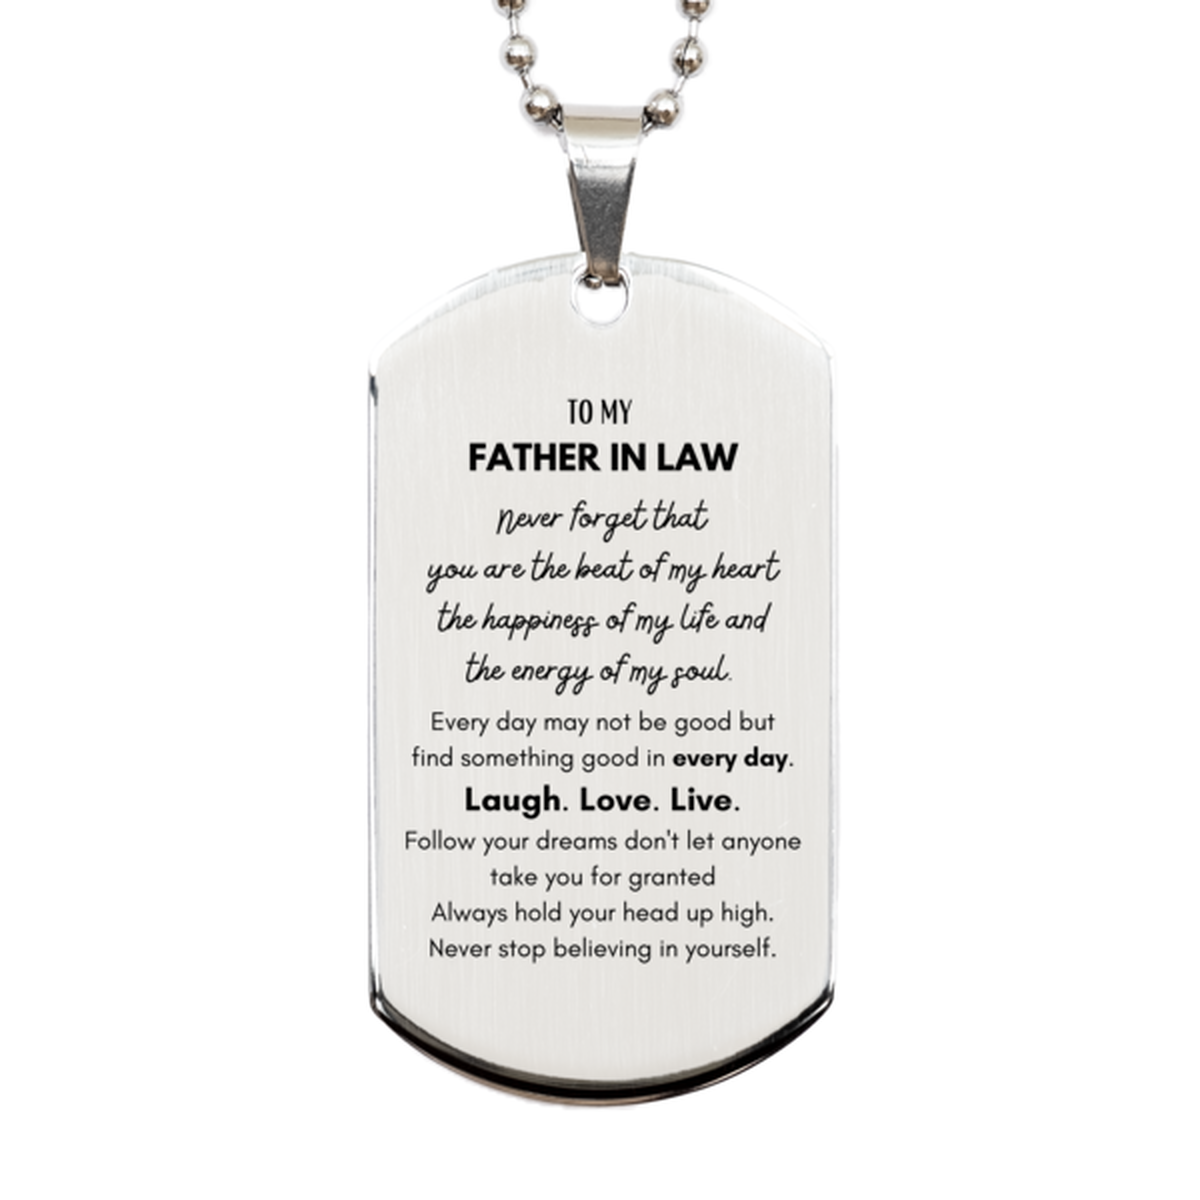 To My Father In Law Dogtag Gifts, Christmas Father In Law Silver Dog Tag Present, Birthday Unique Motivational For Father In Law, To My Father In Law Never forget that you are the beat of my heart the happiness of my life and the energy of my soul